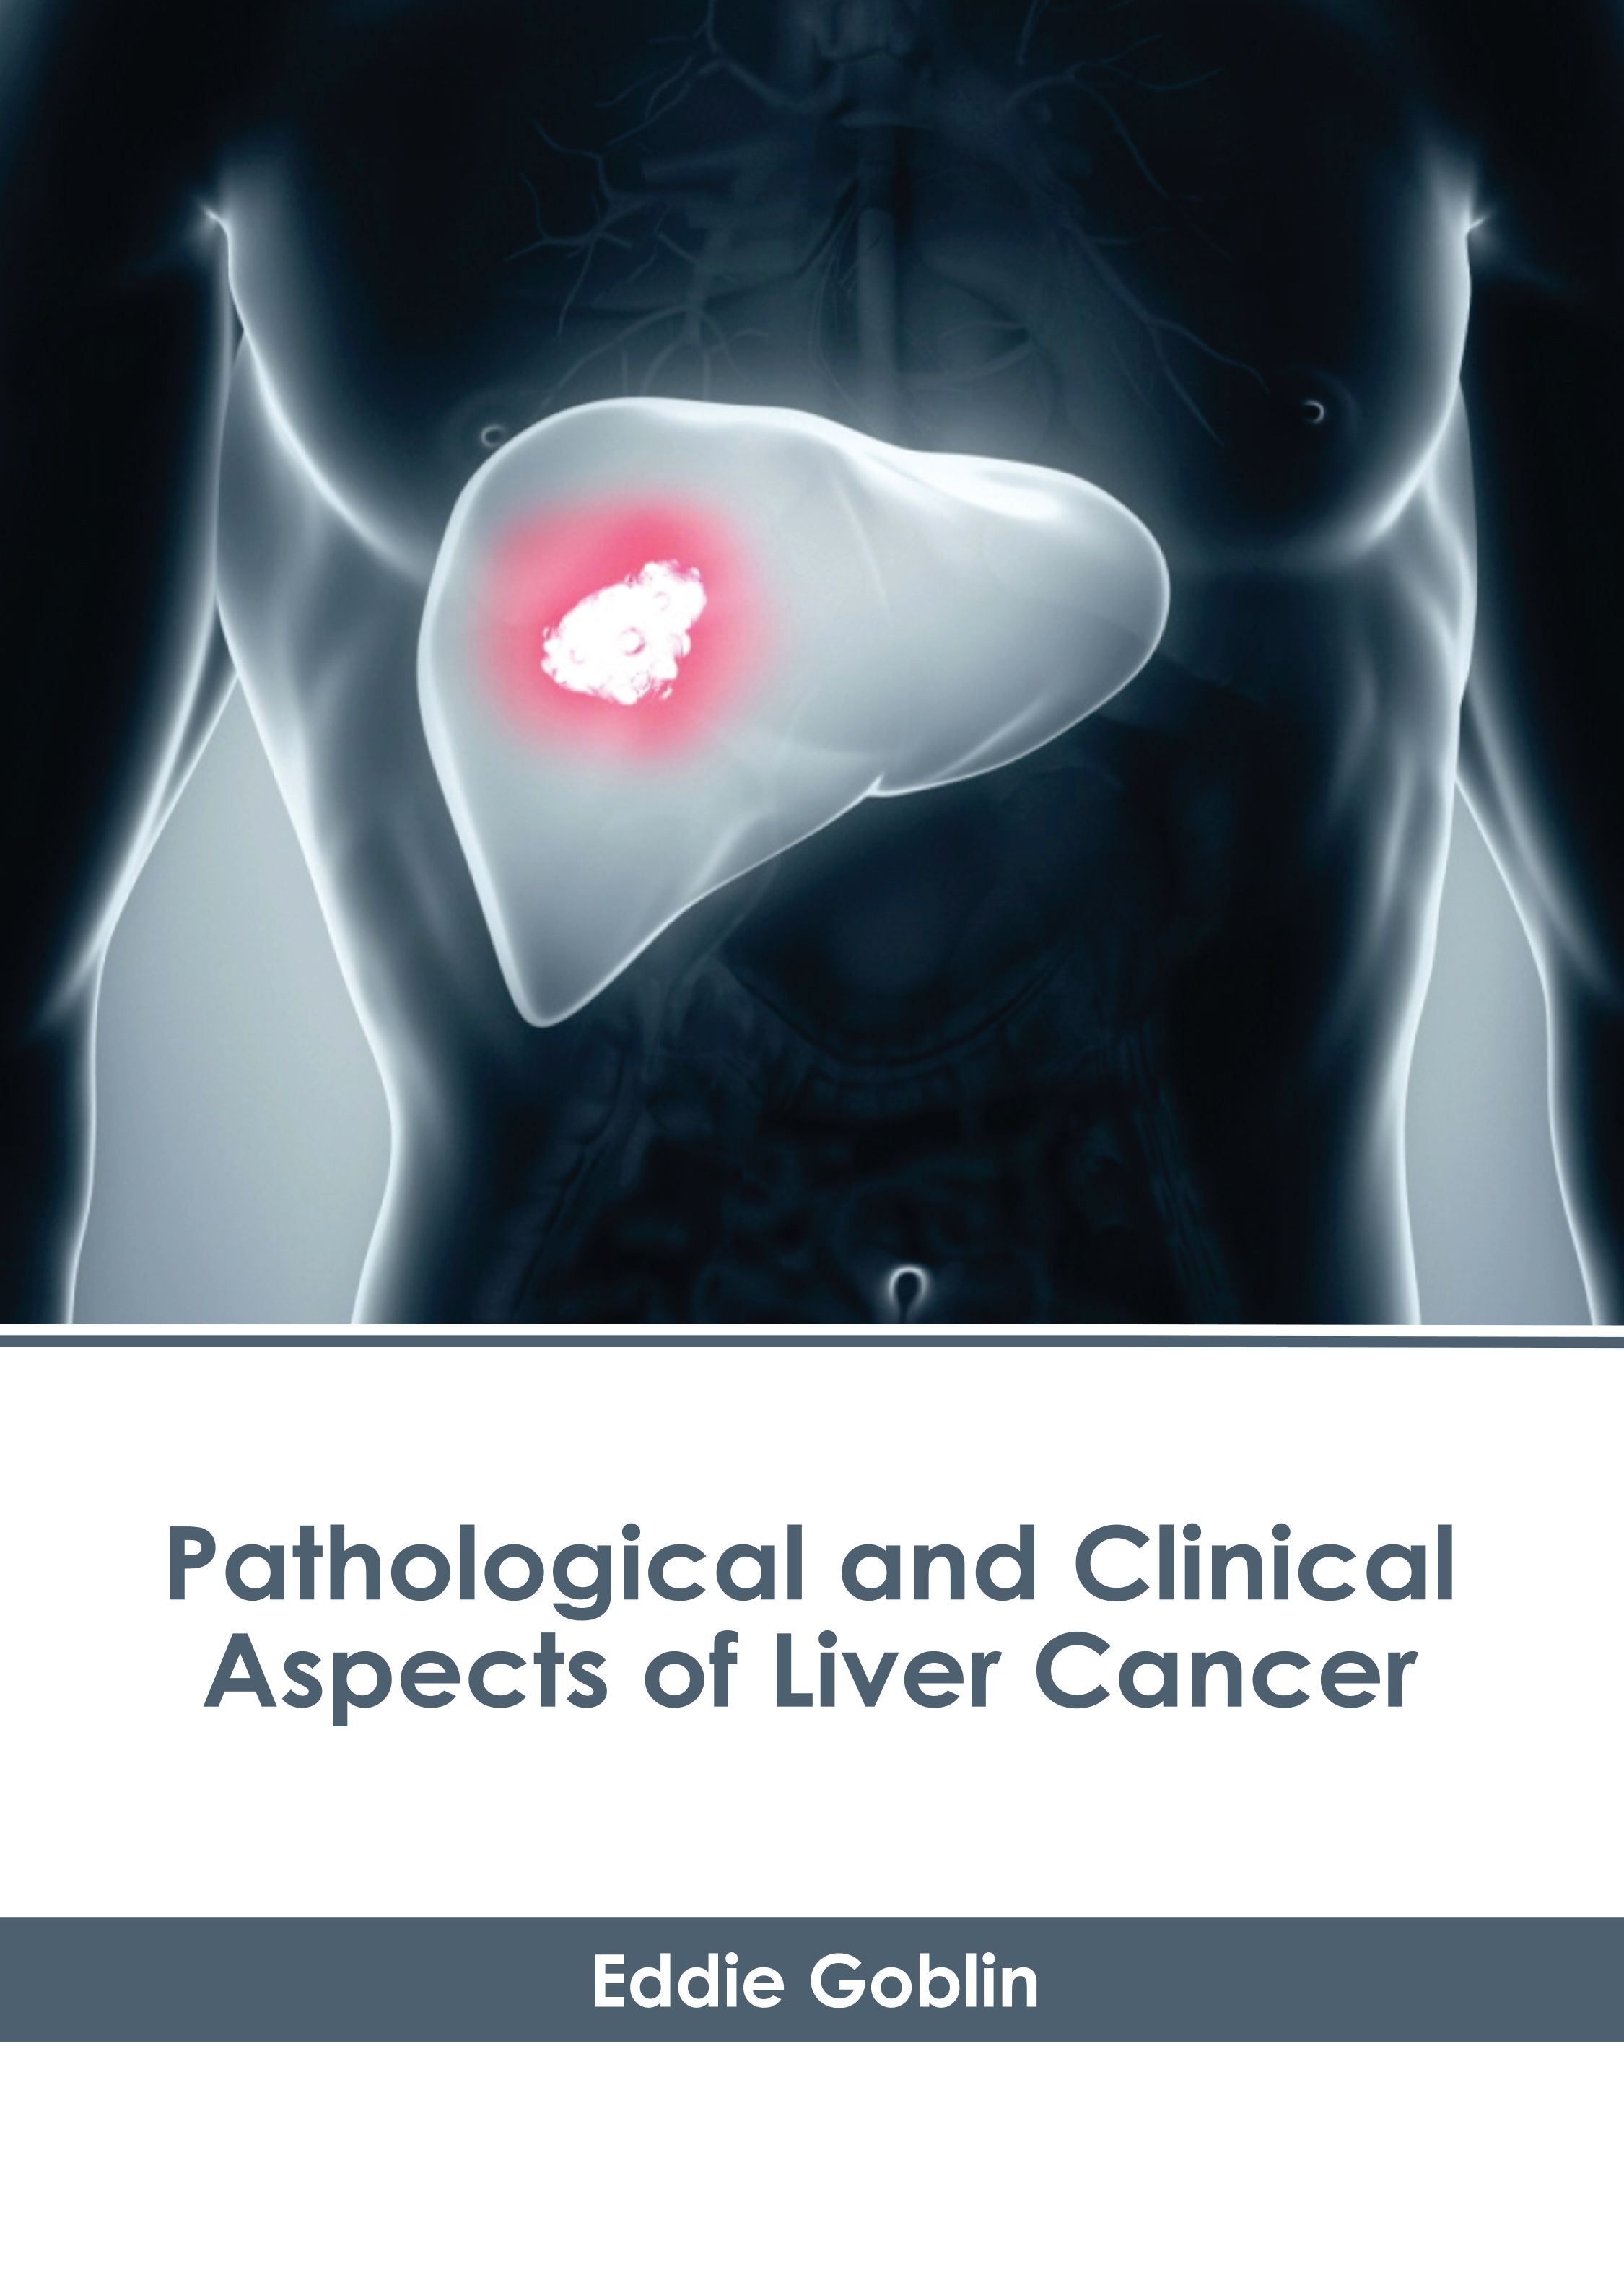 PATHOLOGICAL AND CLINICAL ASPECTS OF LIVER CANCER